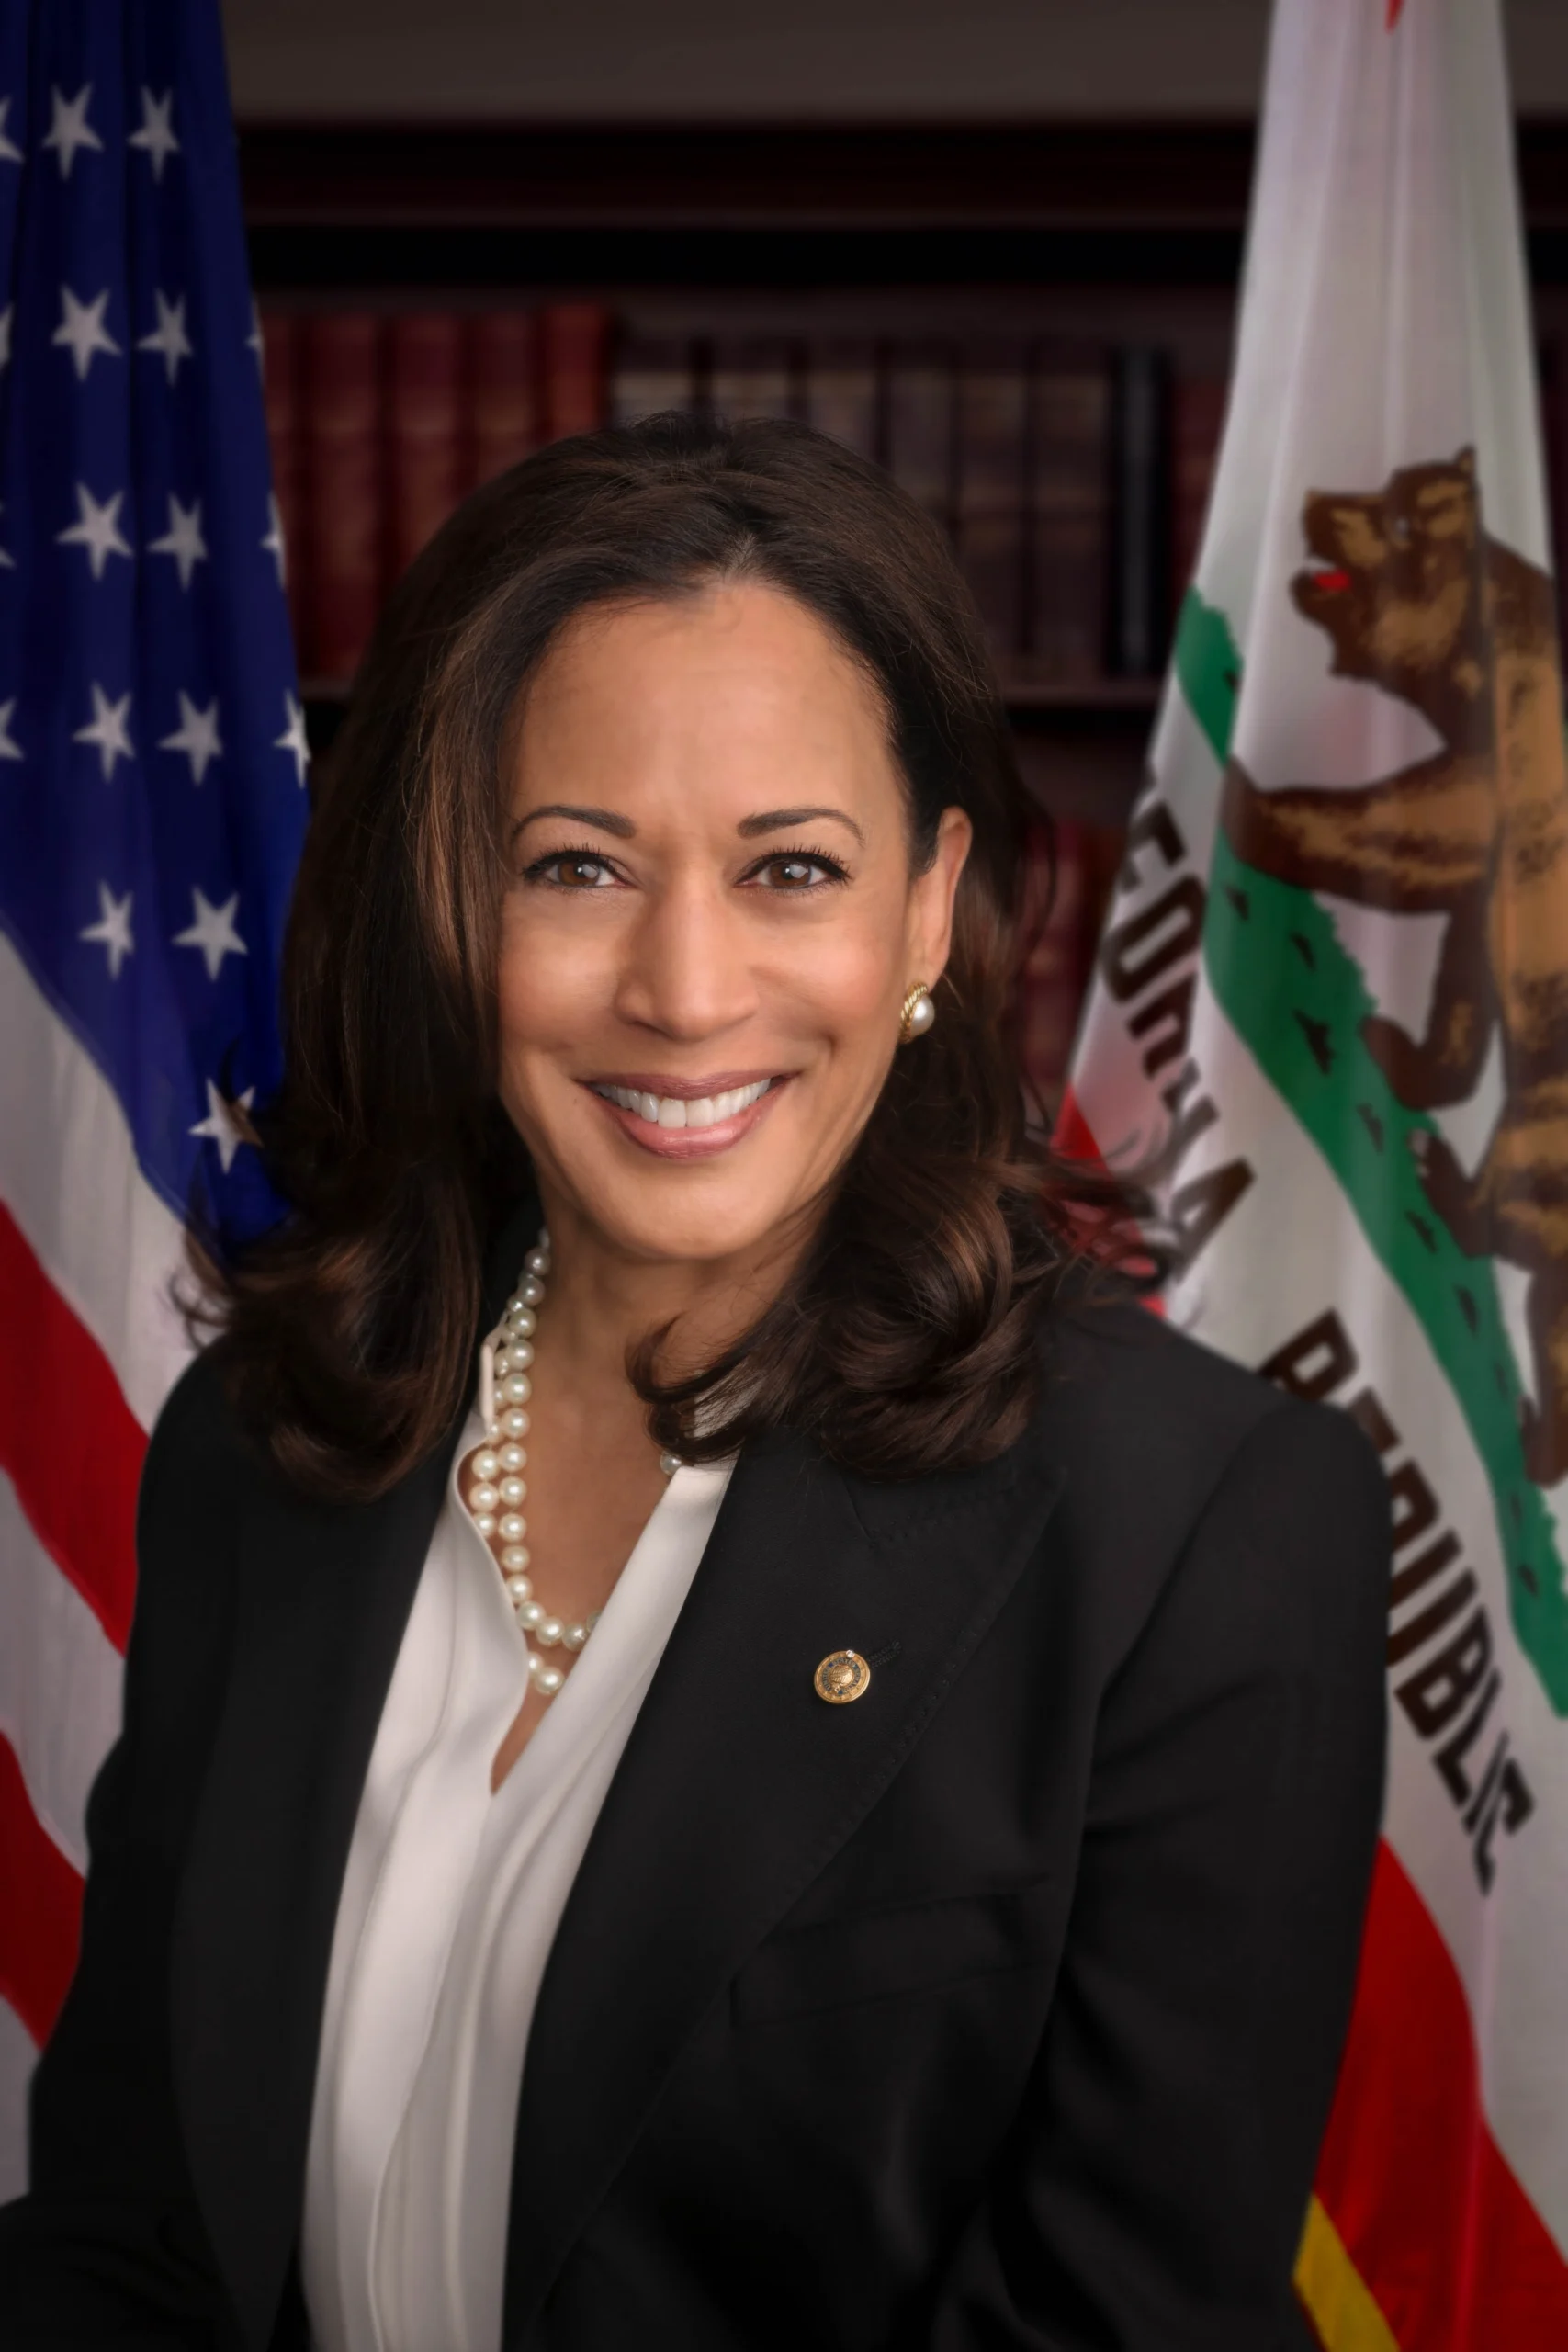 Harris's reputation continued to grow, and in 2003, she made history by becoming the first African American woman elected as San Francisco's district attorney.